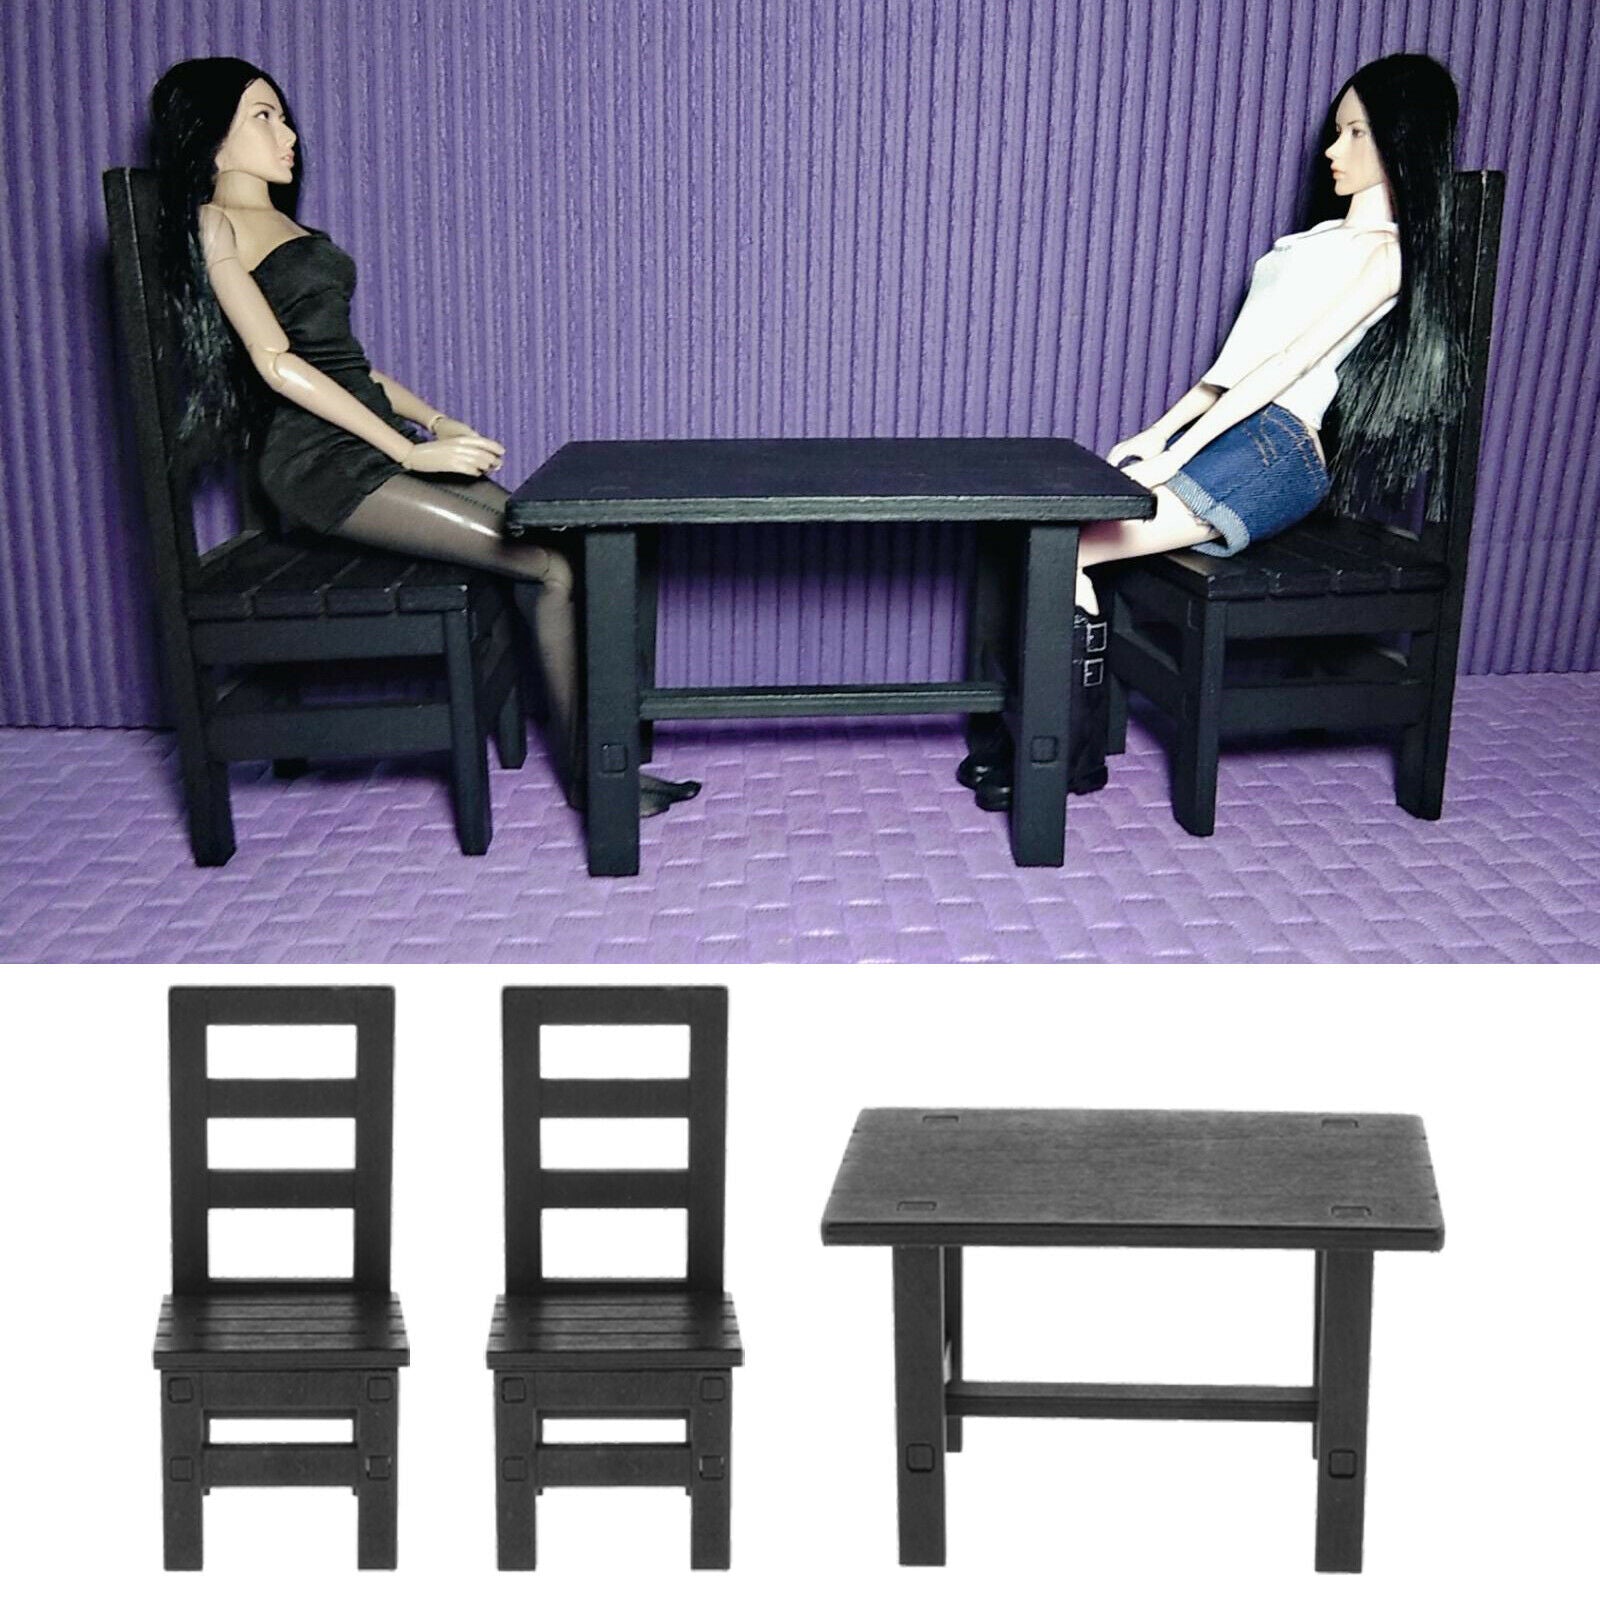 1/6 Table & Chairs for 12inch Kumik TBLeague DML DID TTL Dress up Black